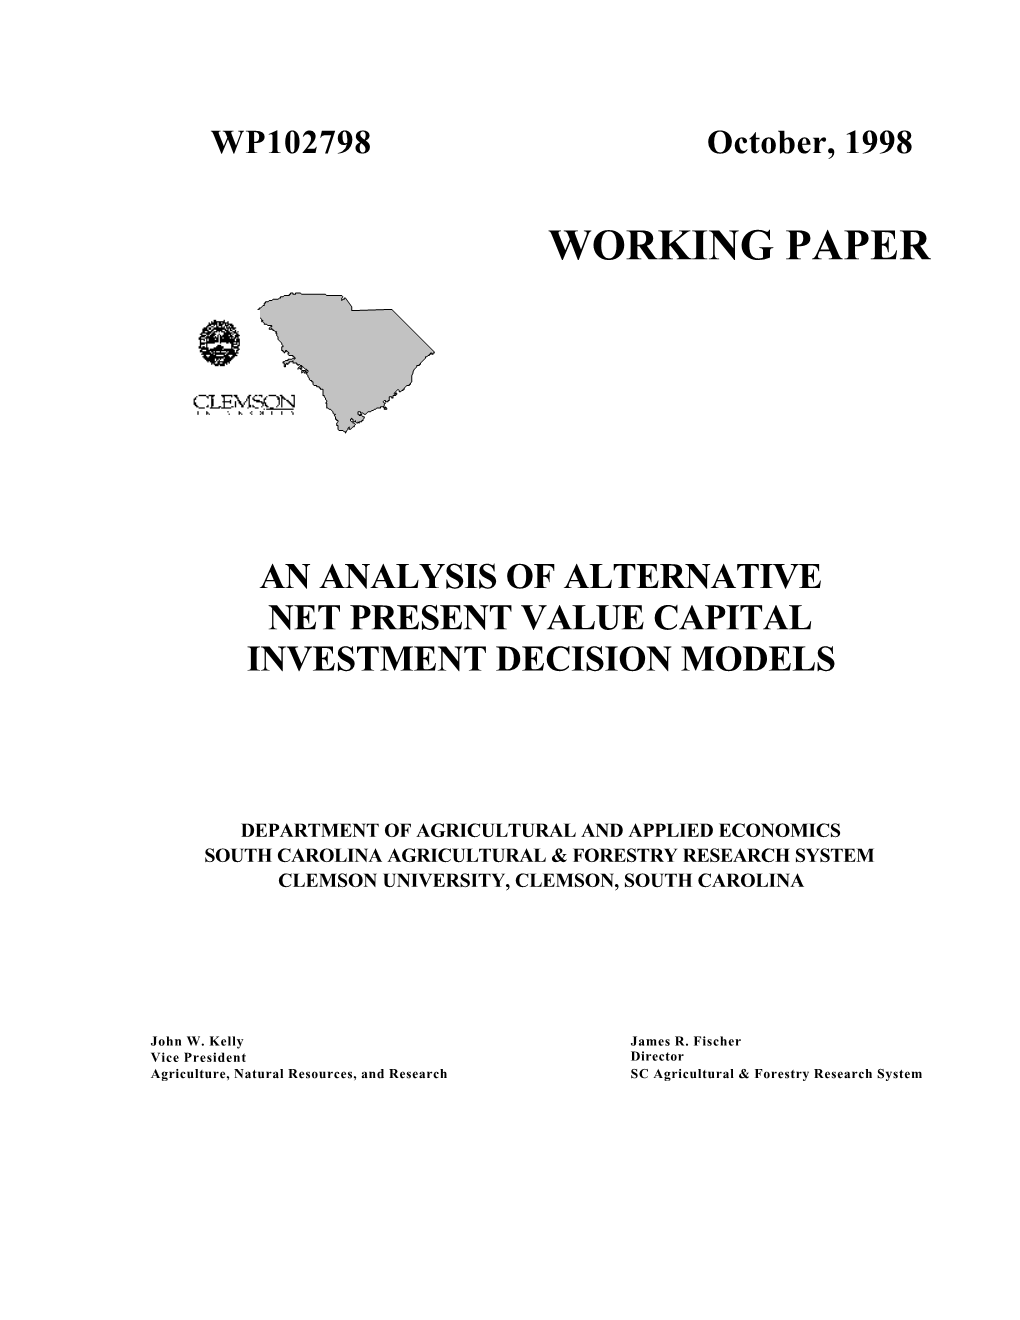 An Analysis of Alternative Net Present Value Capital Investment Decision Models